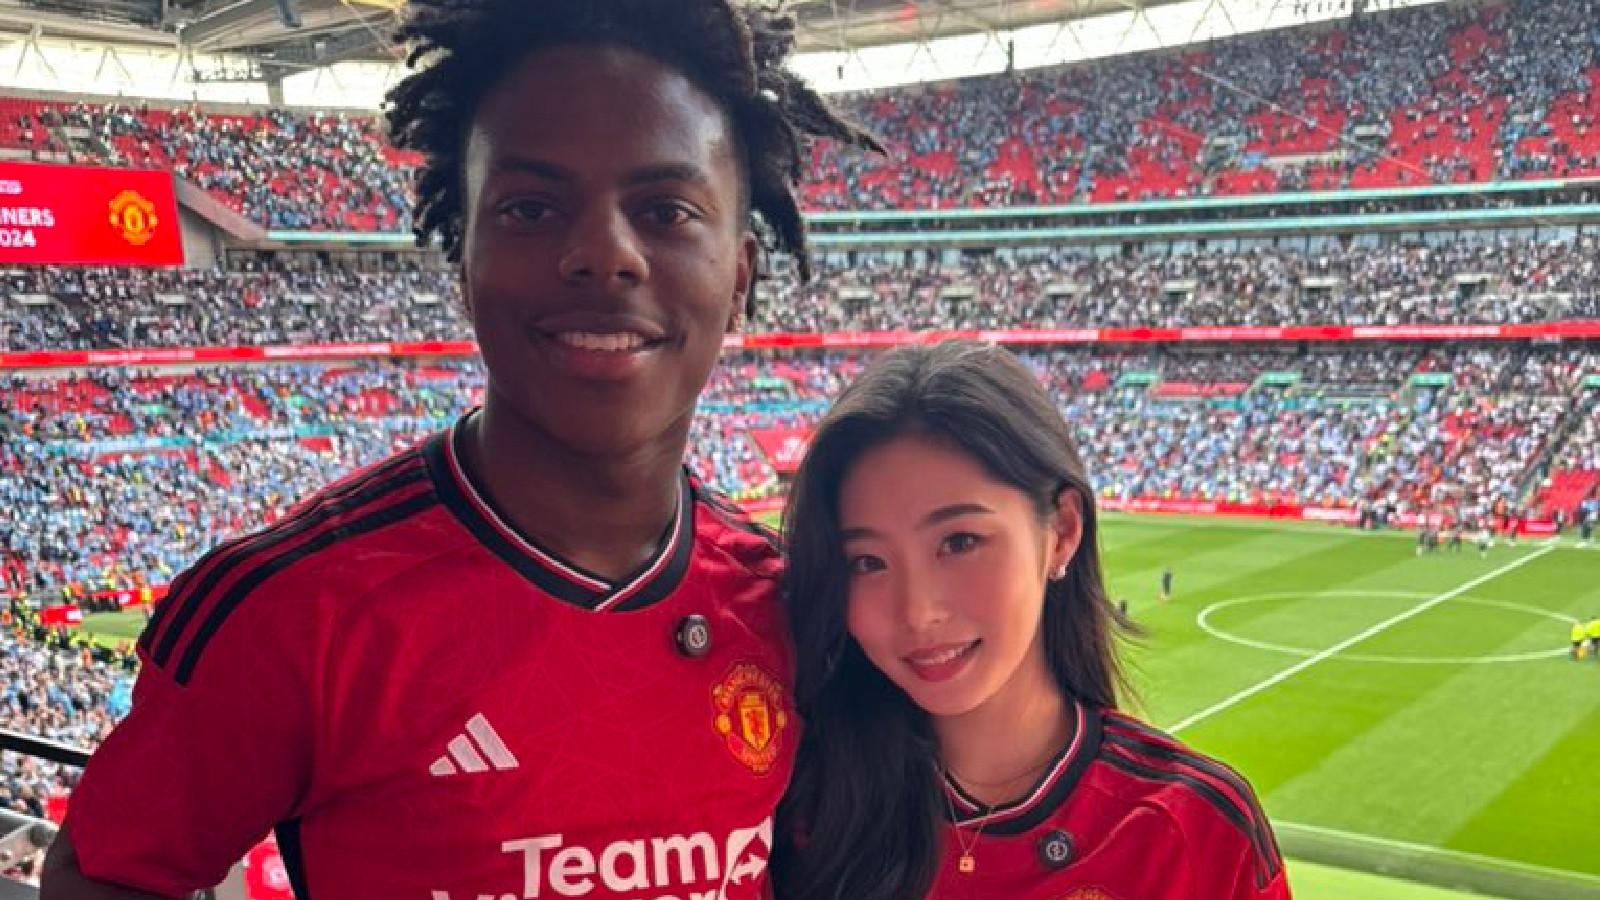 IShowSpeed and Amy Flmay wearing Manchester United shirts at Wembley Stadium